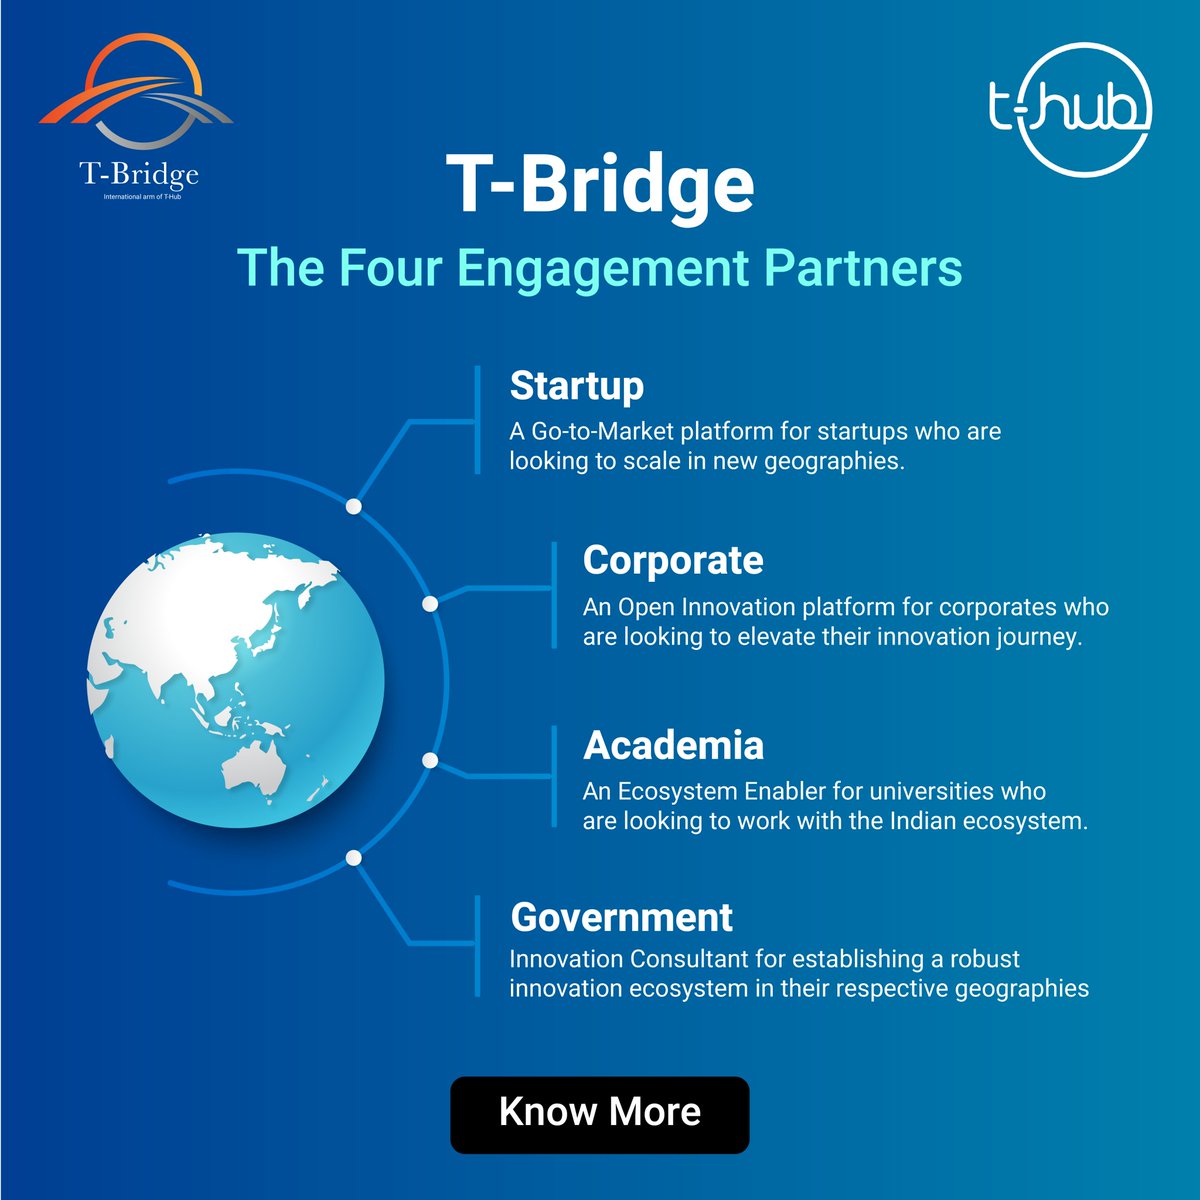 T-Bridge’s works with a simple & powerful idea -  ‘To create a seamless pathway for #startups to #scale, corporates to #innovate, #academia to inspire, & #governments to connect, fostering a #global ecosystem.' Join us in this transformative journey - bit.ly/3OFAu2o